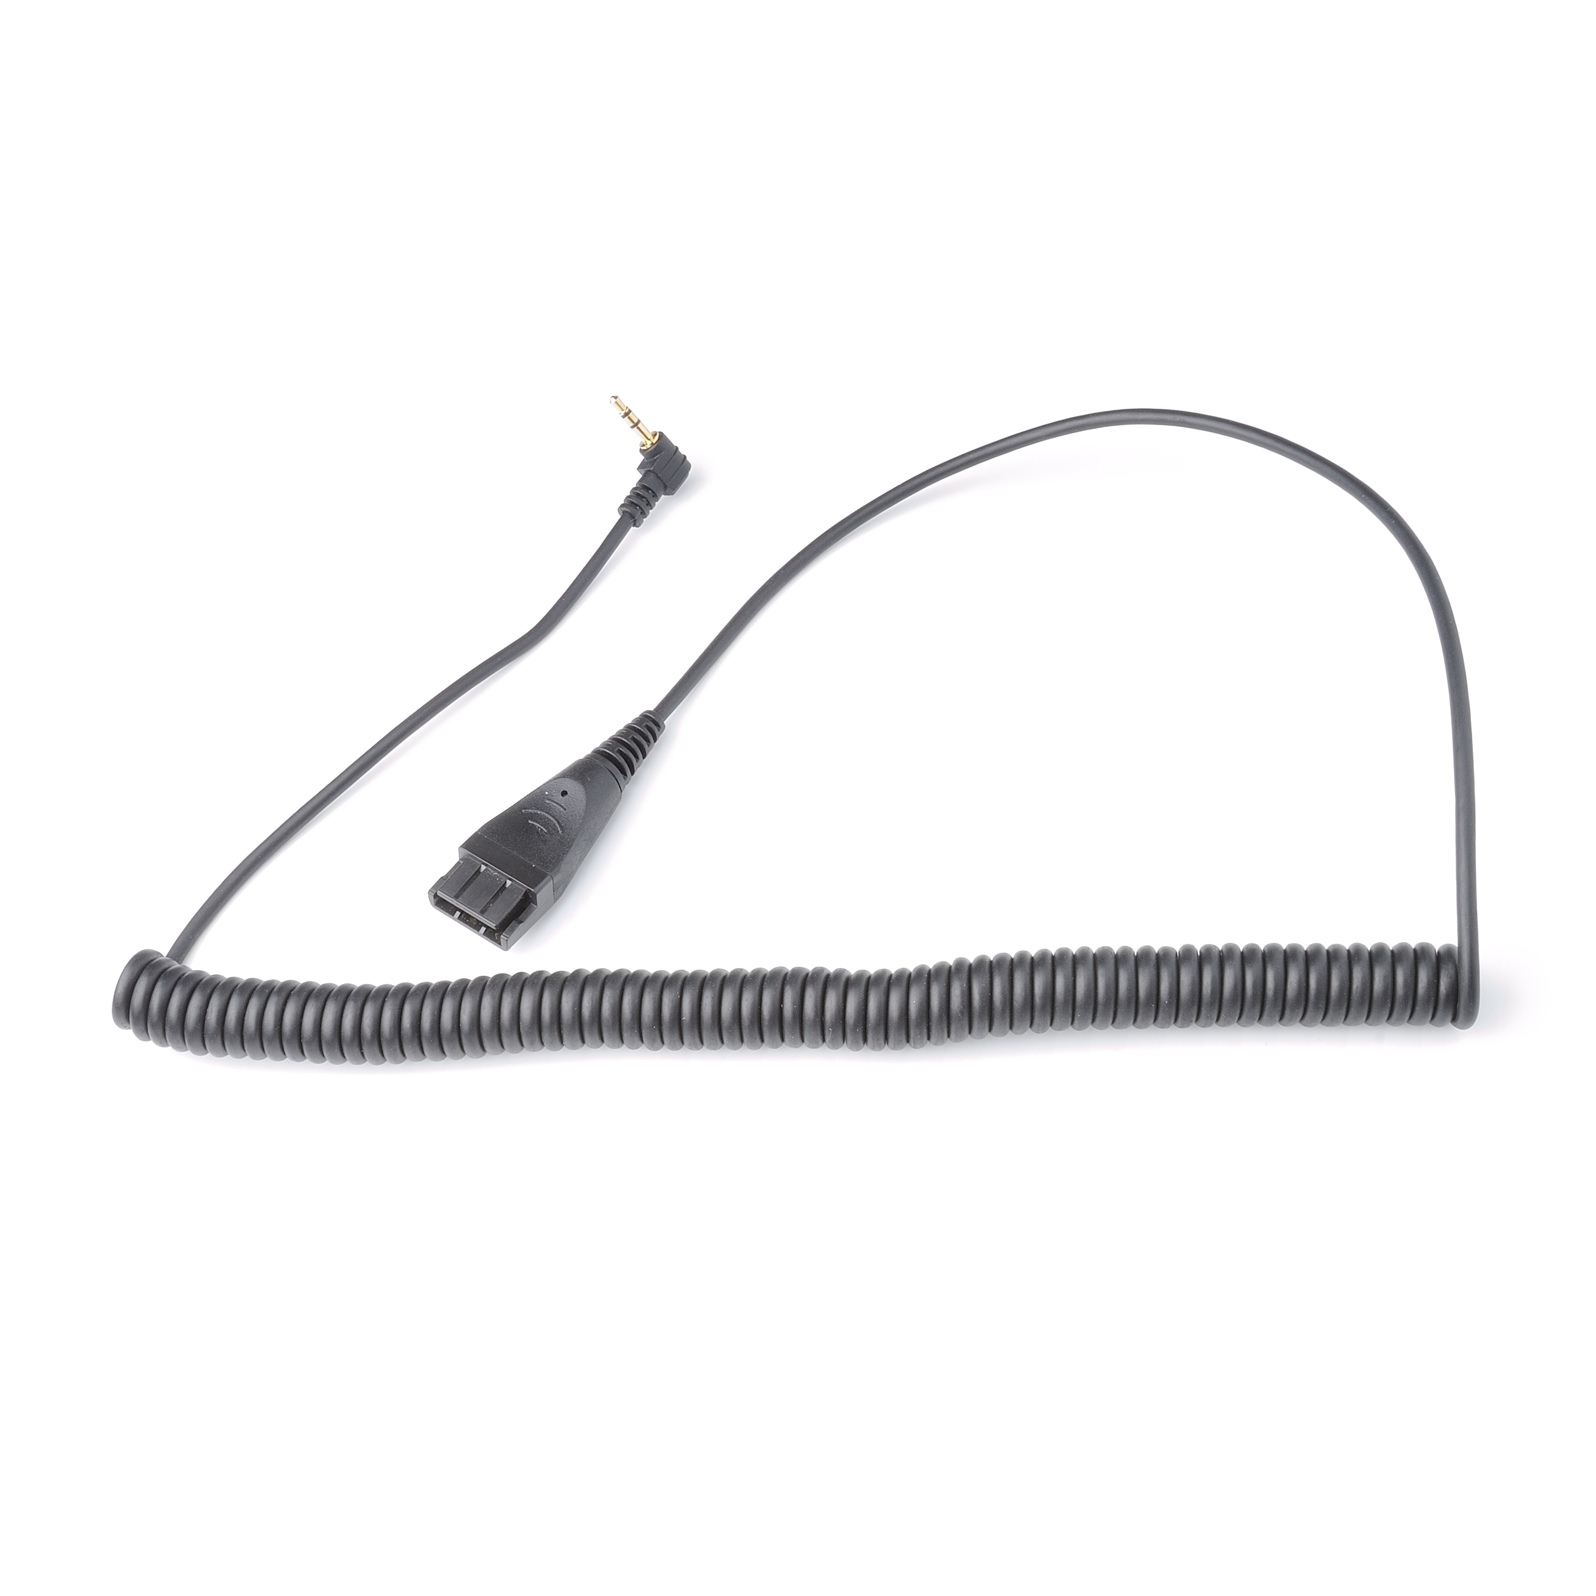 OvisLink Headset 2.5mm Quick Disconnect Cord